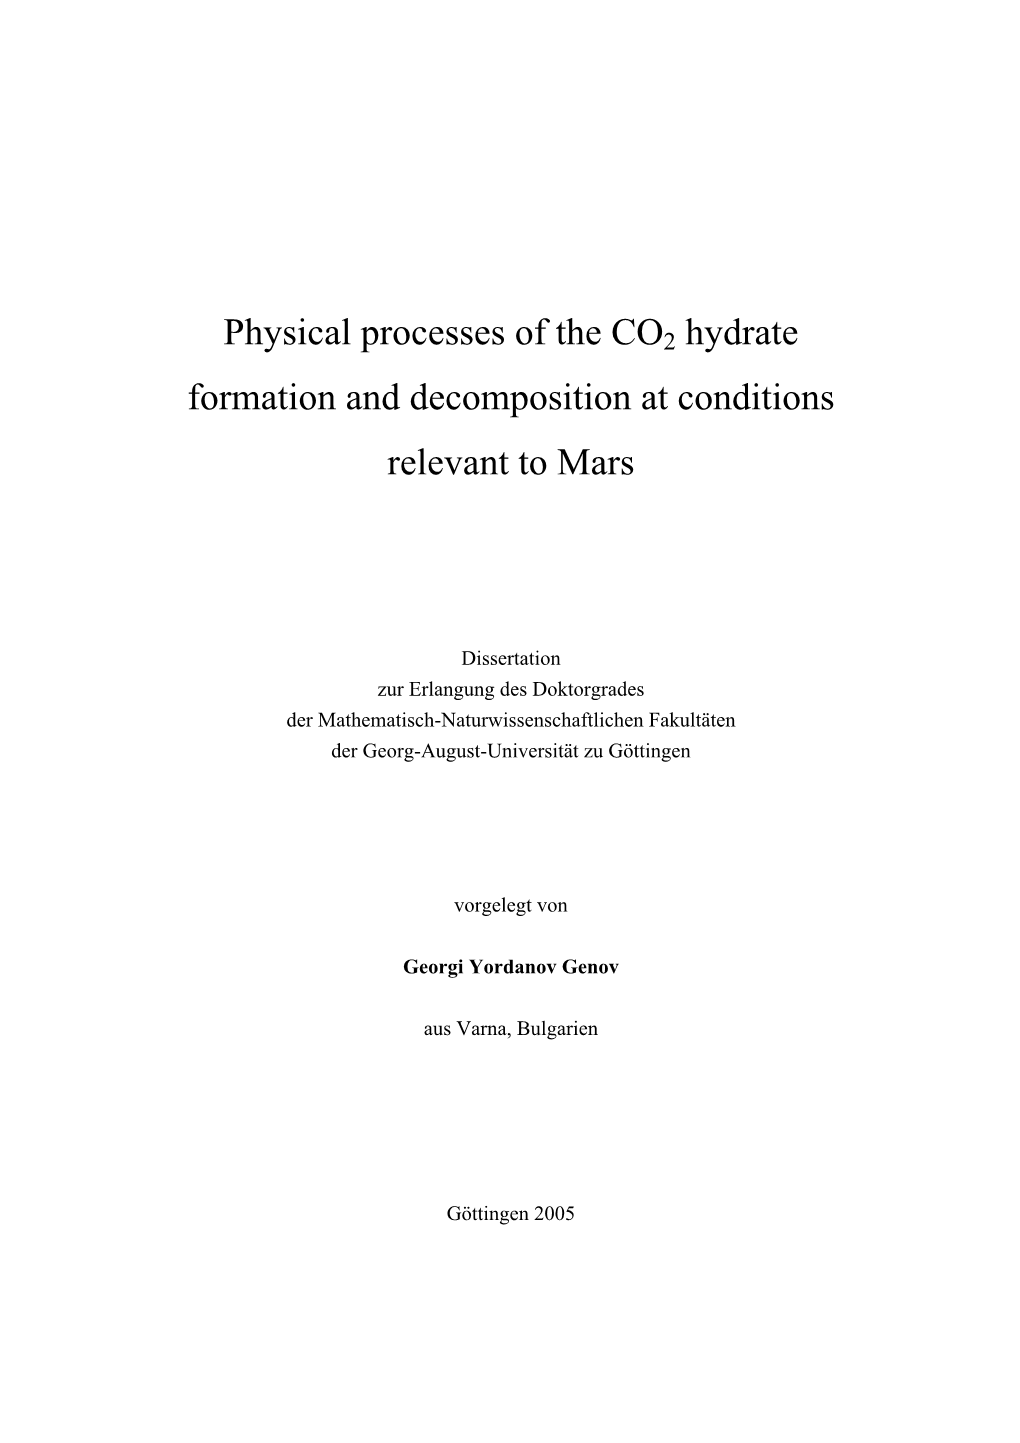 Physical Processes of the CO2 Hydrate Formation and Decomposition at Conditions Relevant to Mars